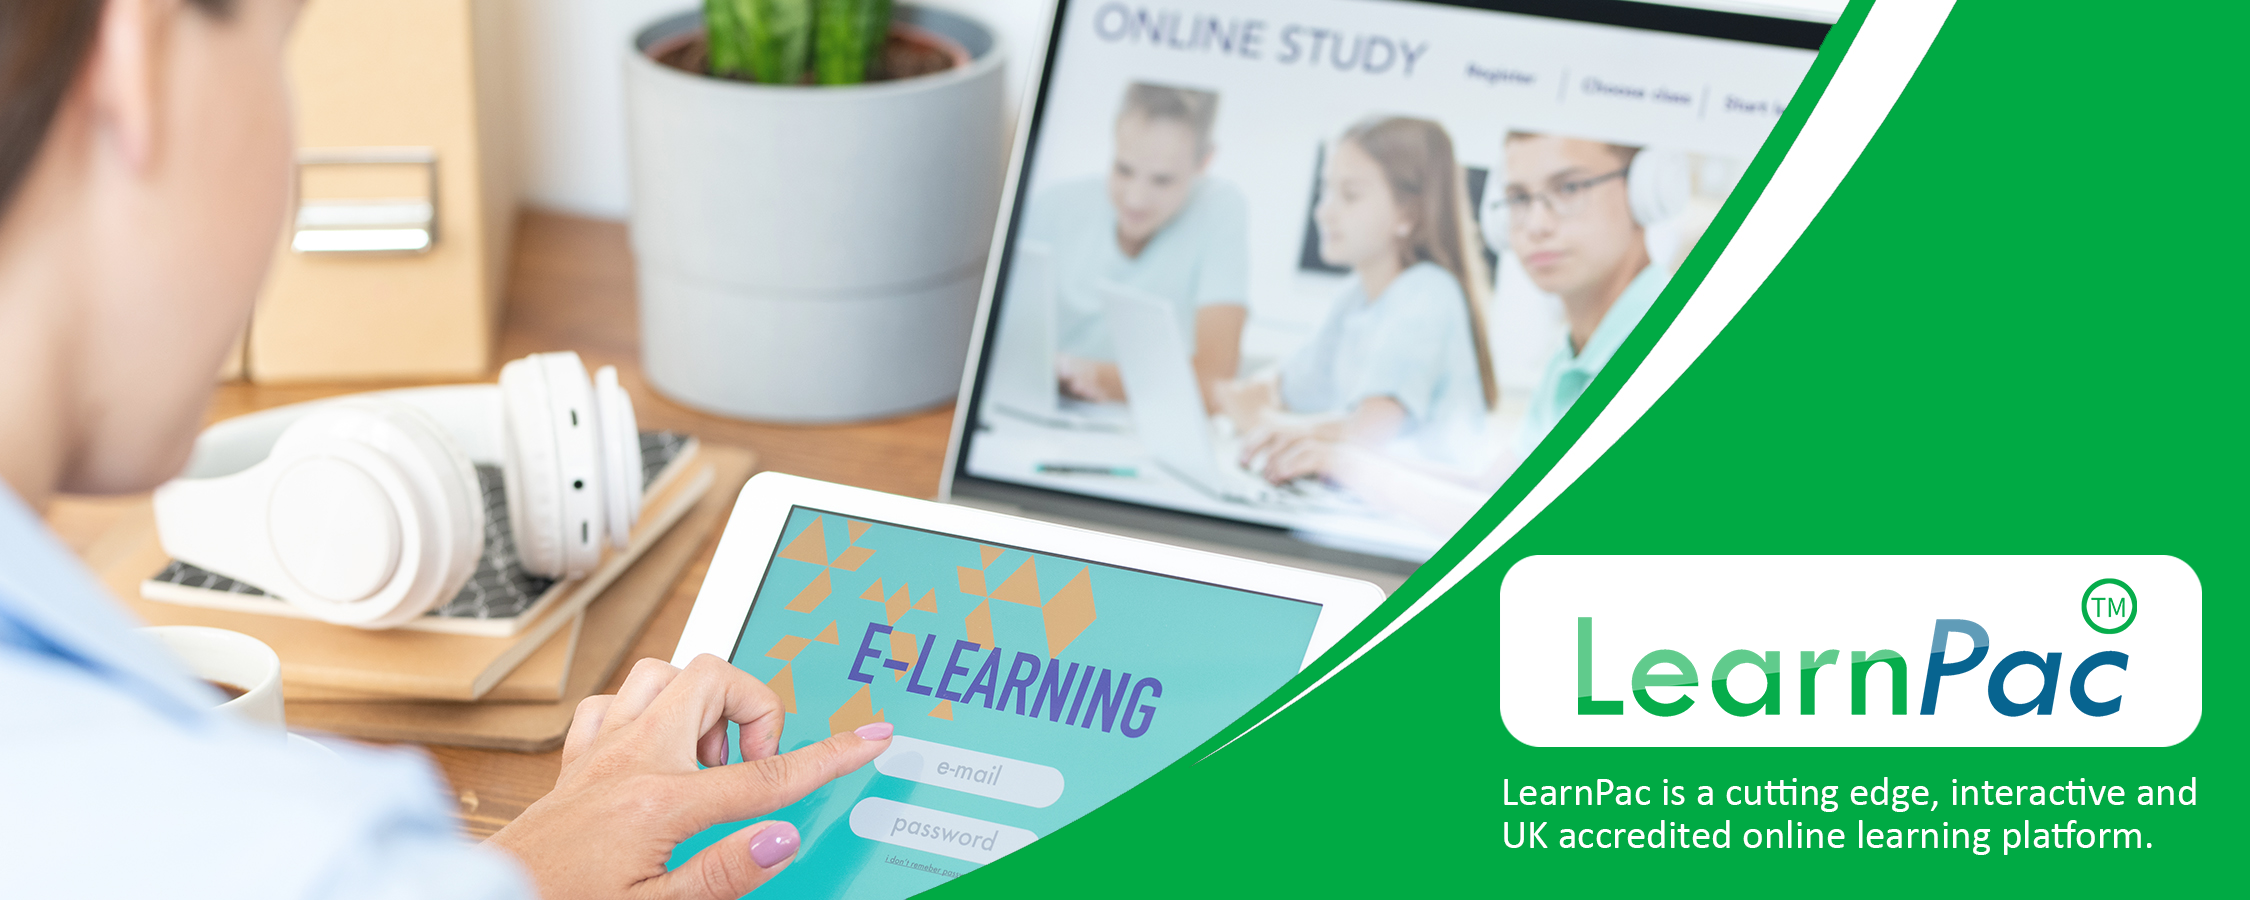 Inclusion and Diversity - E-Learning Courses - LearnPac Systems UK -